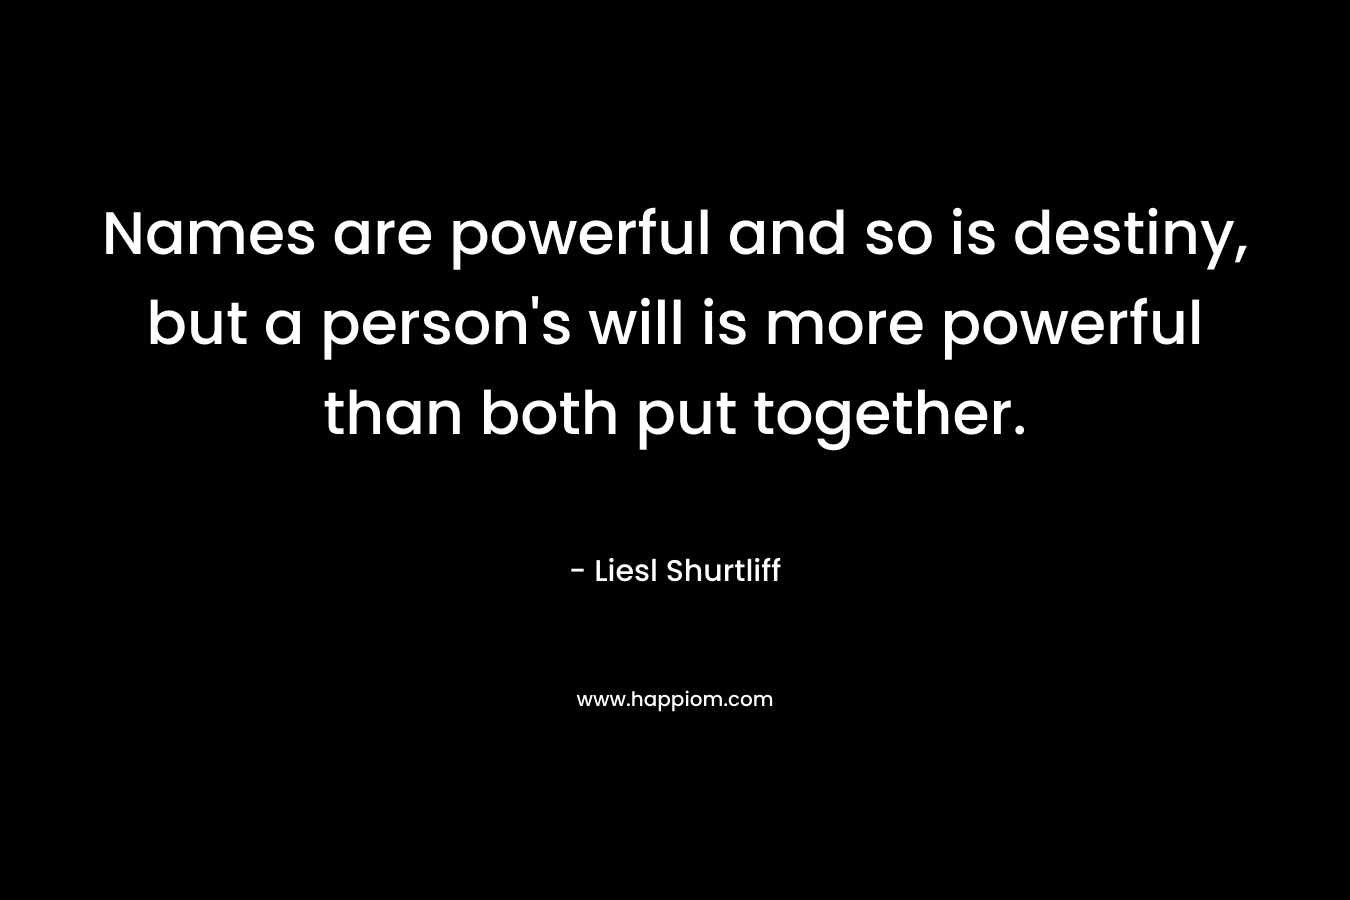 Names are powerful and so is destiny, but a person’s will is more powerful than both put together. – Liesl Shurtliff